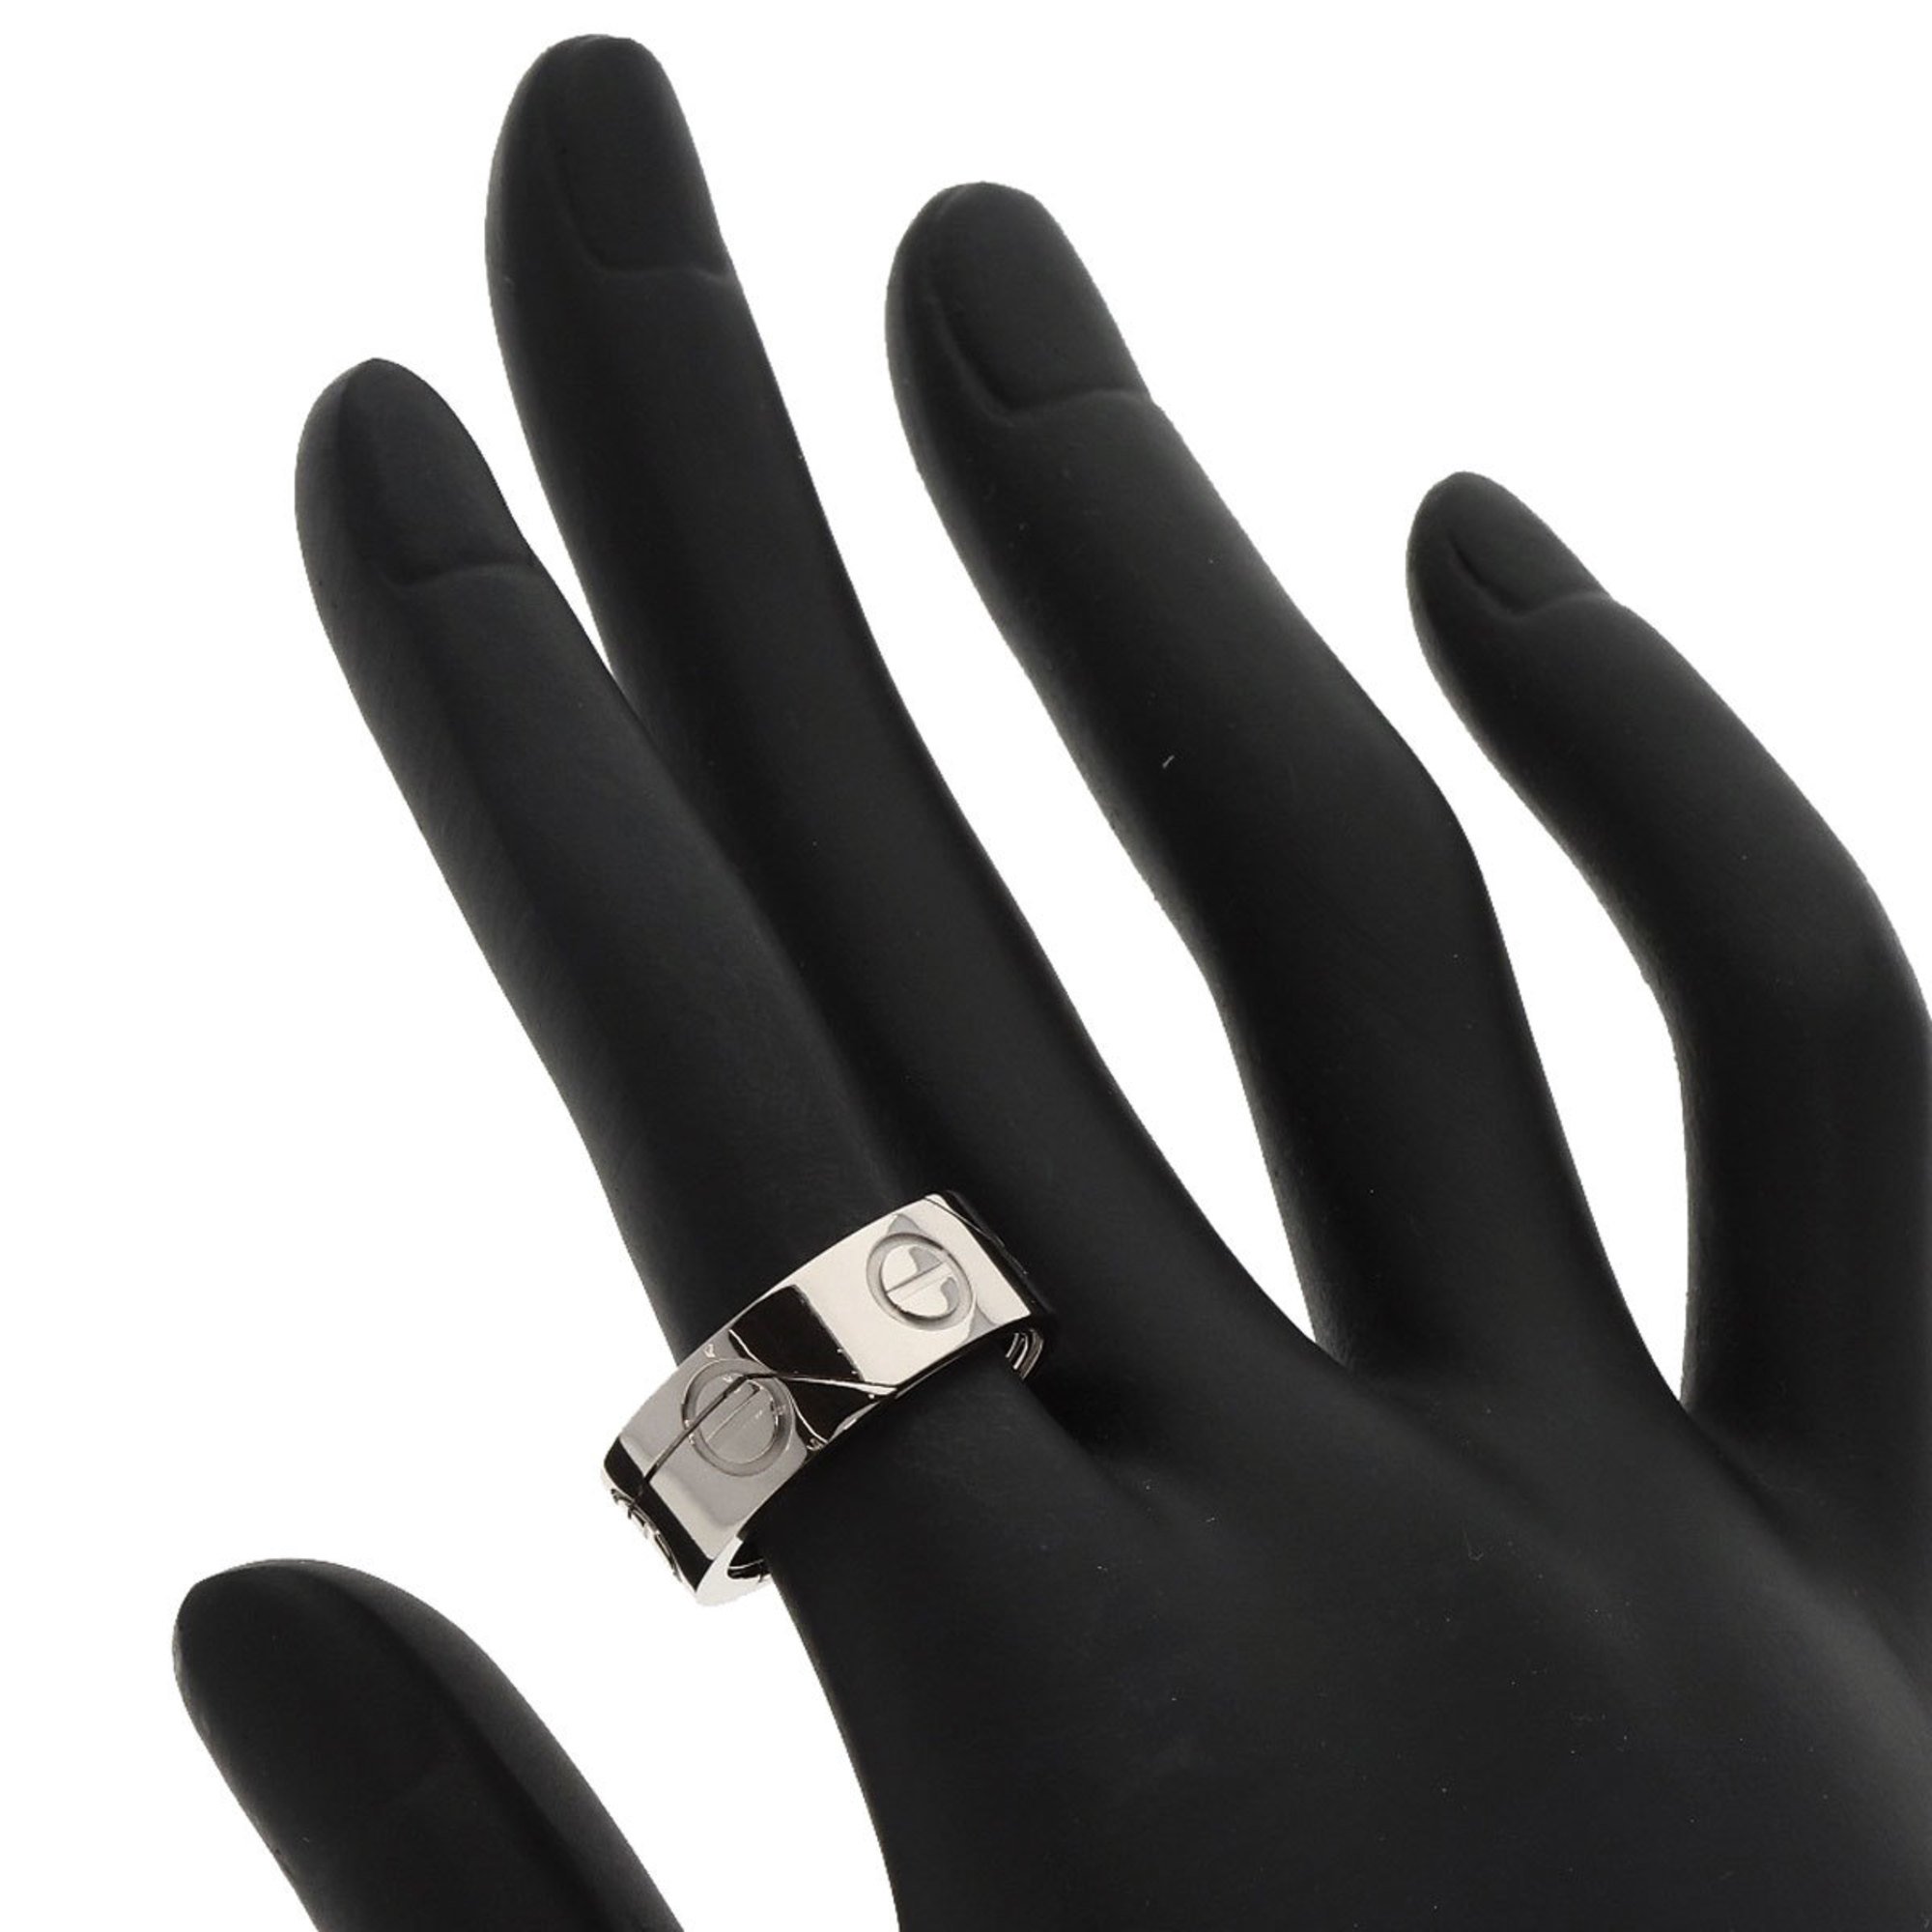 Cartier Astro Love Ring 1999 Limited Edition #51 K18 White Gold Women's CARTIER